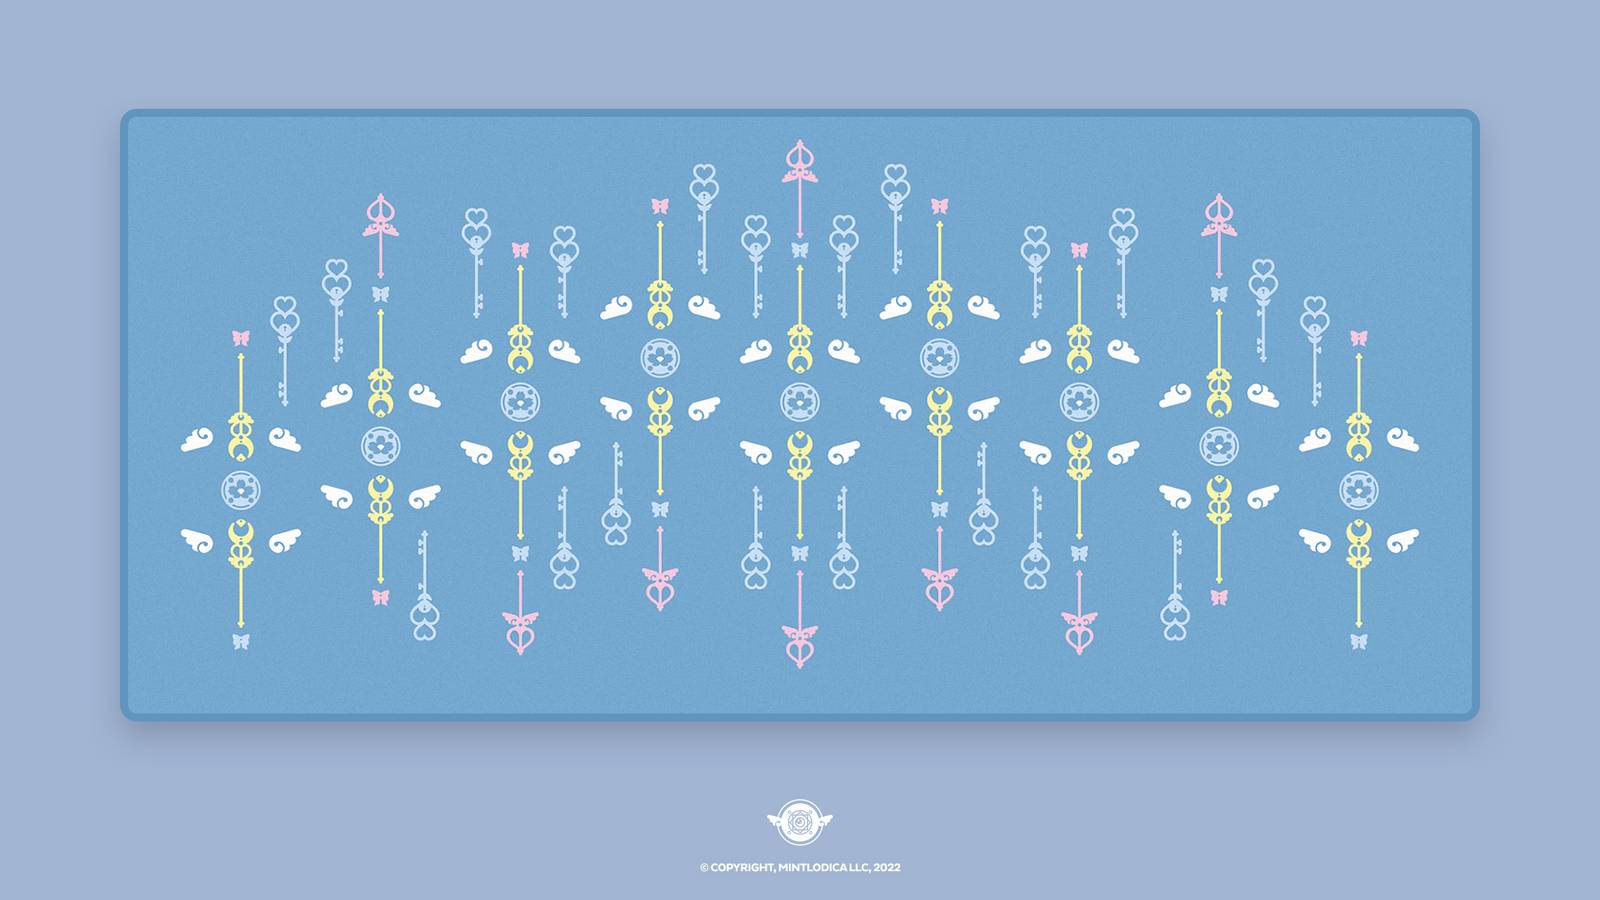 Magic Girl by Mintlodica matching Deskmats or Deskpads in Blue matching the cute anime shoujo manga keycaps. featuring Wands, Familiars, Wings, Ribbons, and Magic Symbols.